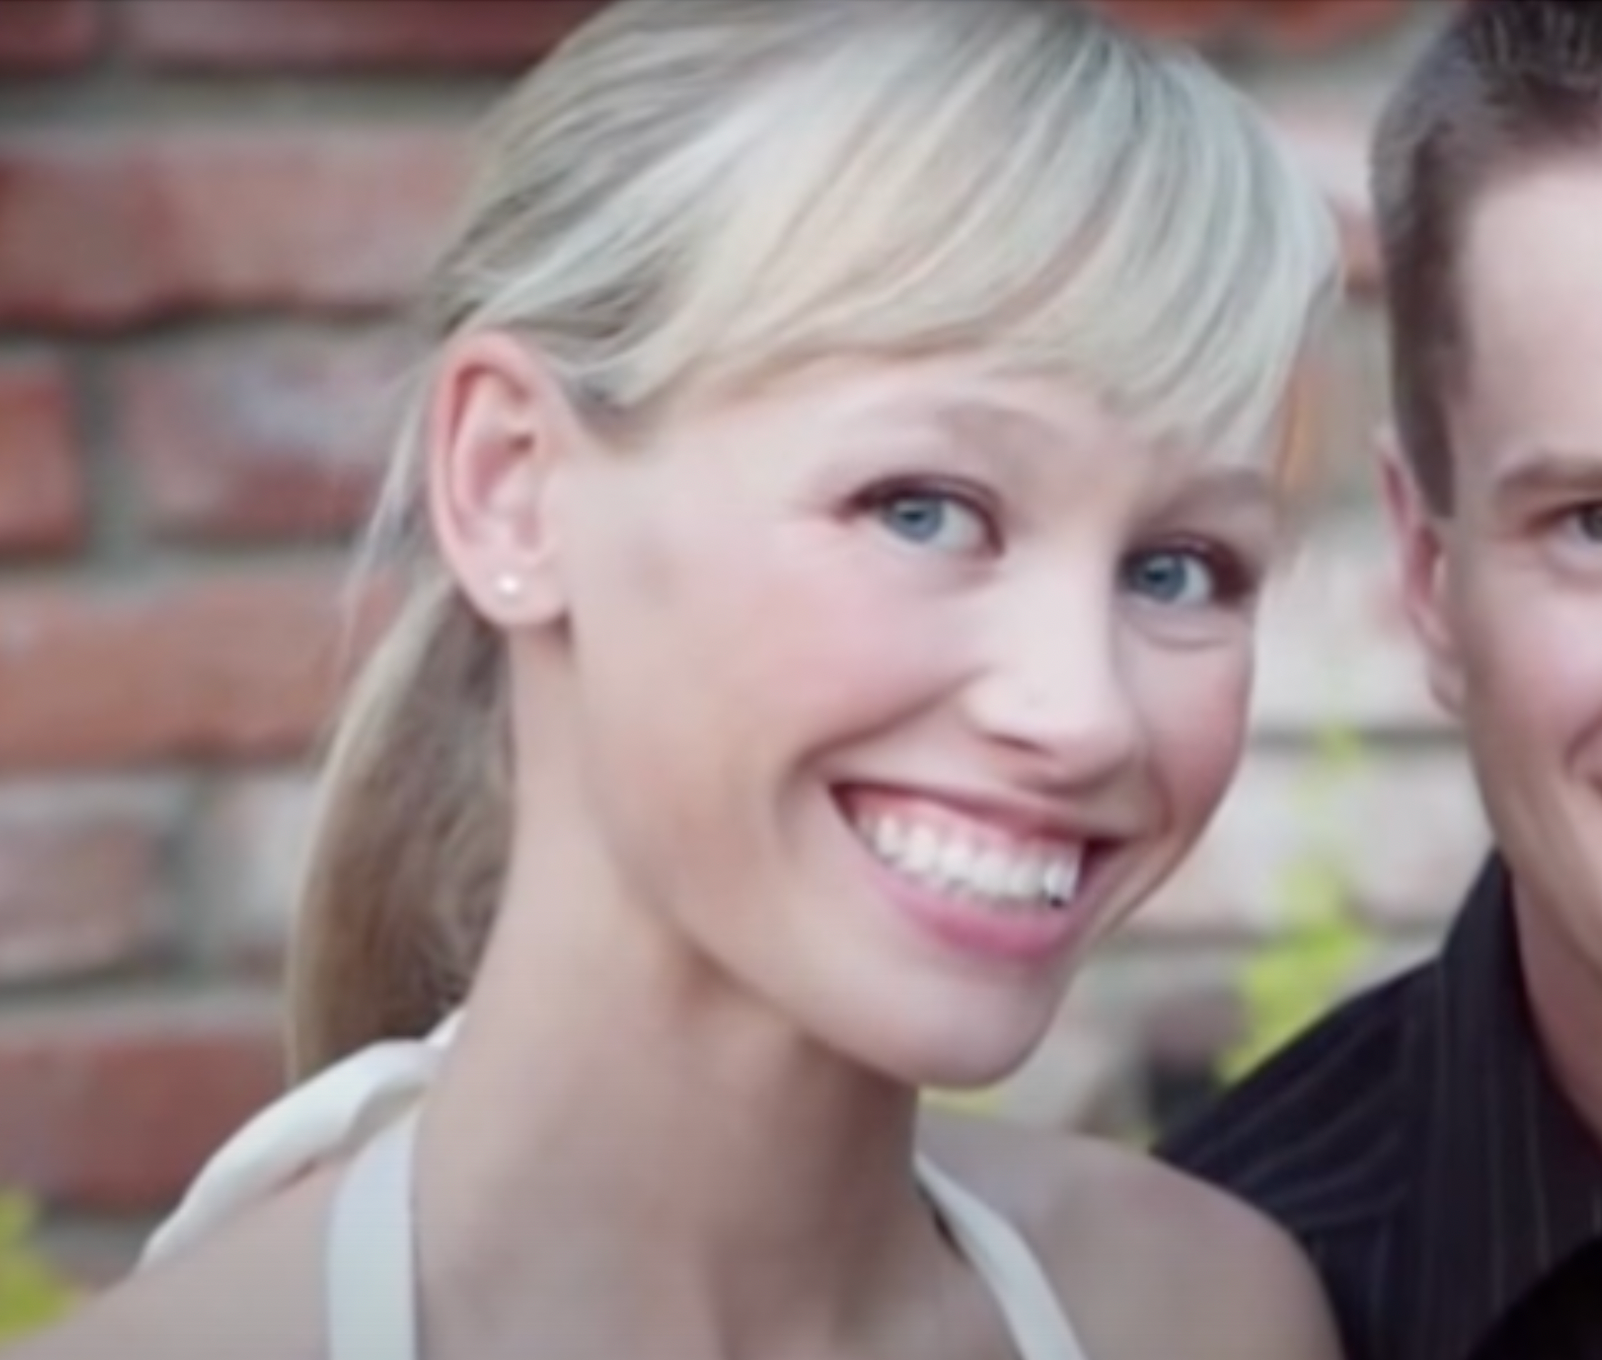 Sherri Papini was arrested and charged with fabricating her own abduction in 2016